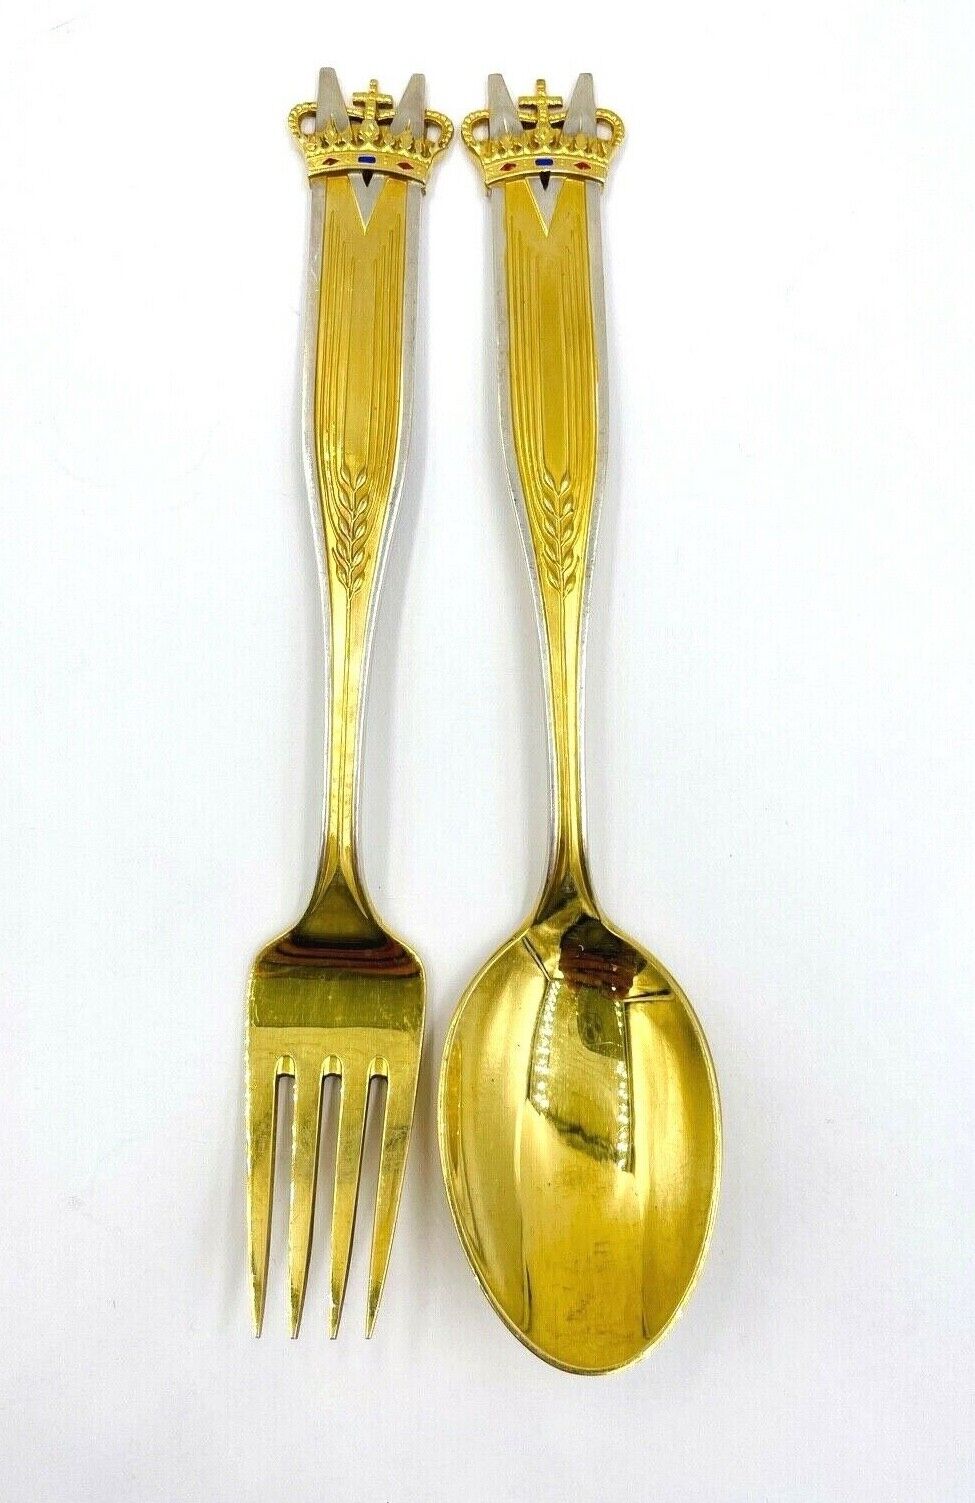 A. Michelsen Remembrance spoon and fork set gilded enamel Crown 1958